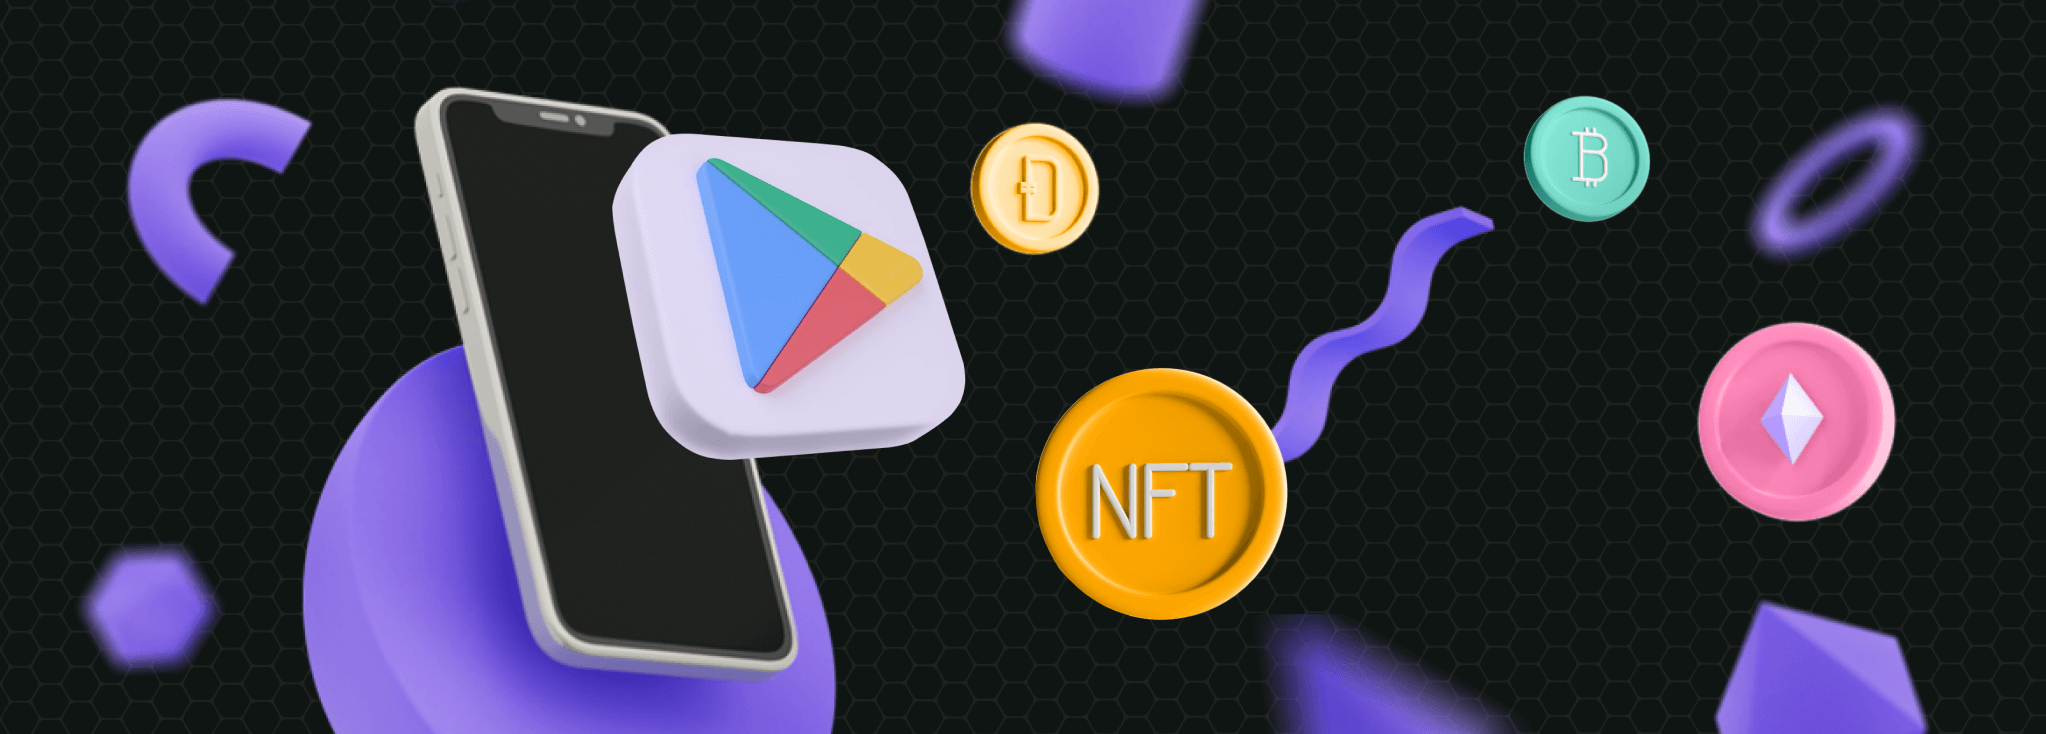 NFT Integration Now Possible in Apps and Games: Google Play's Updated Policy